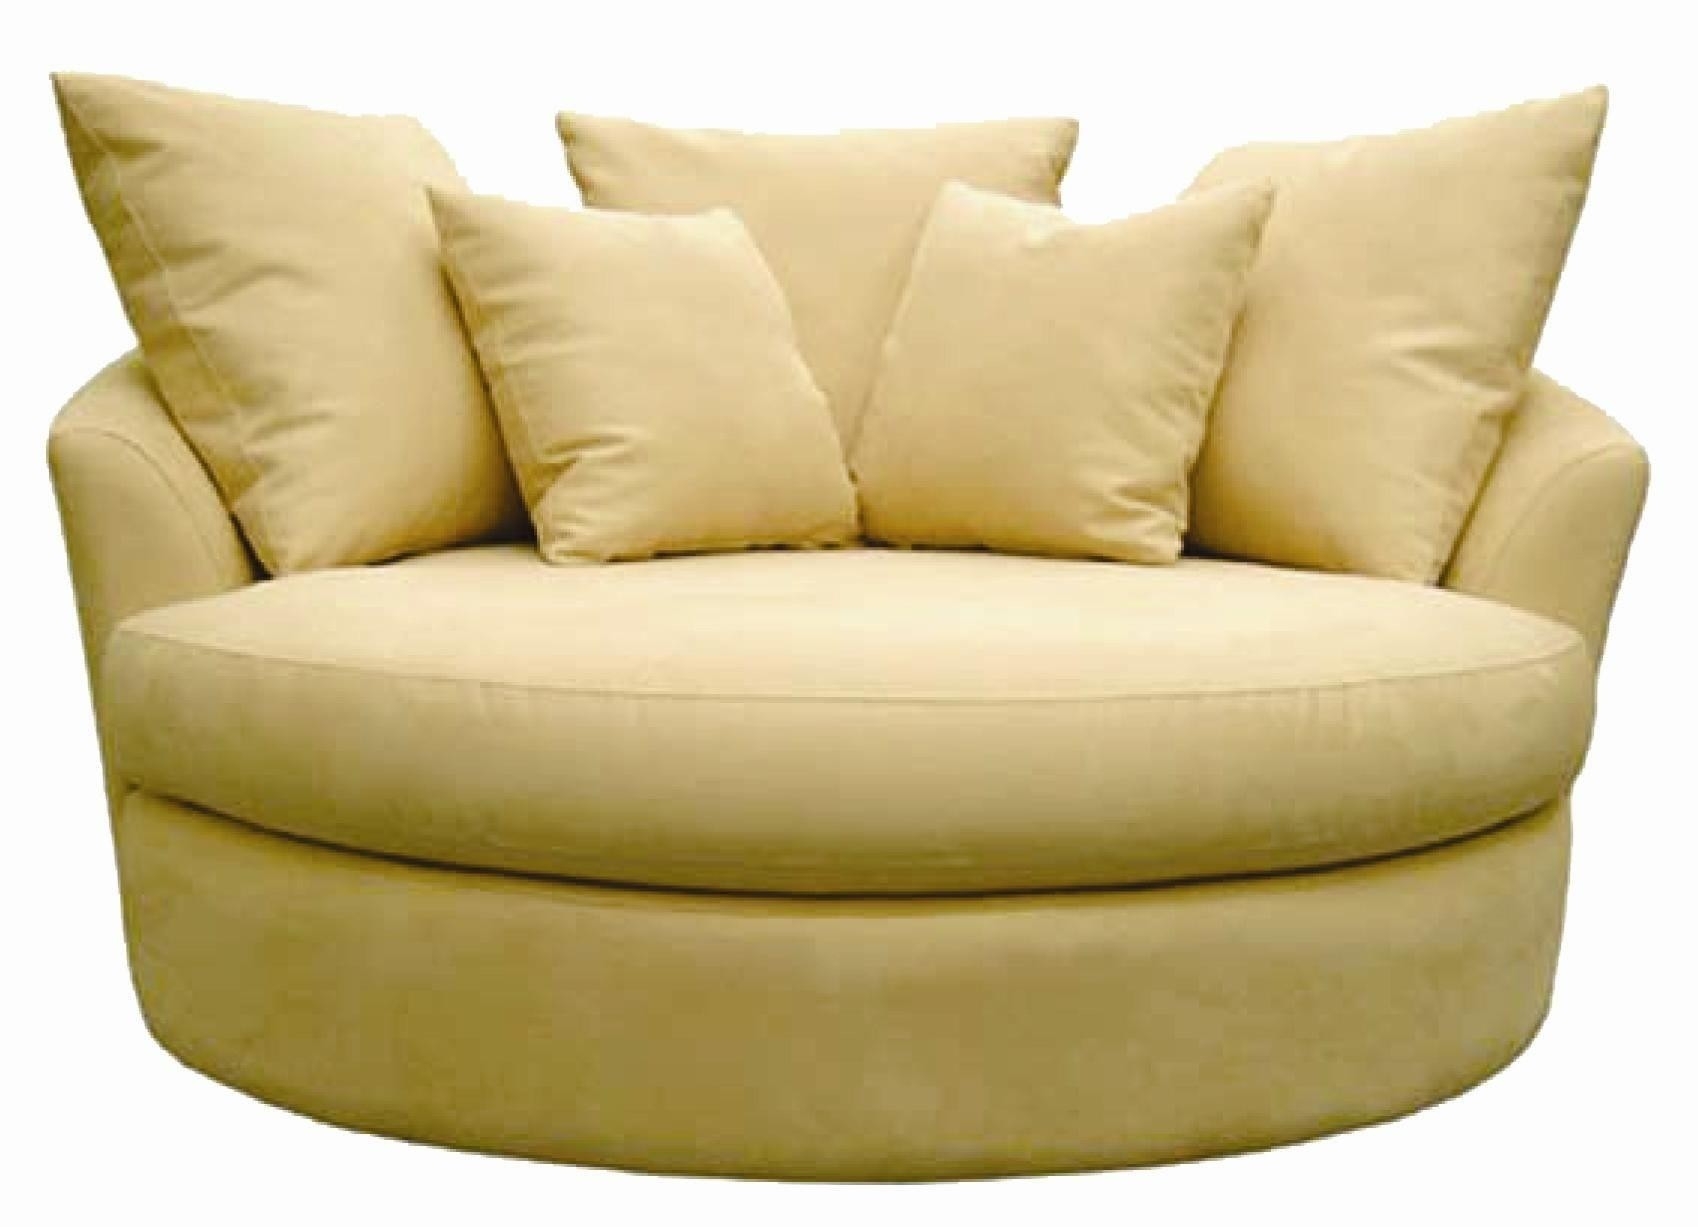 Round Swivel Chair For Living Room